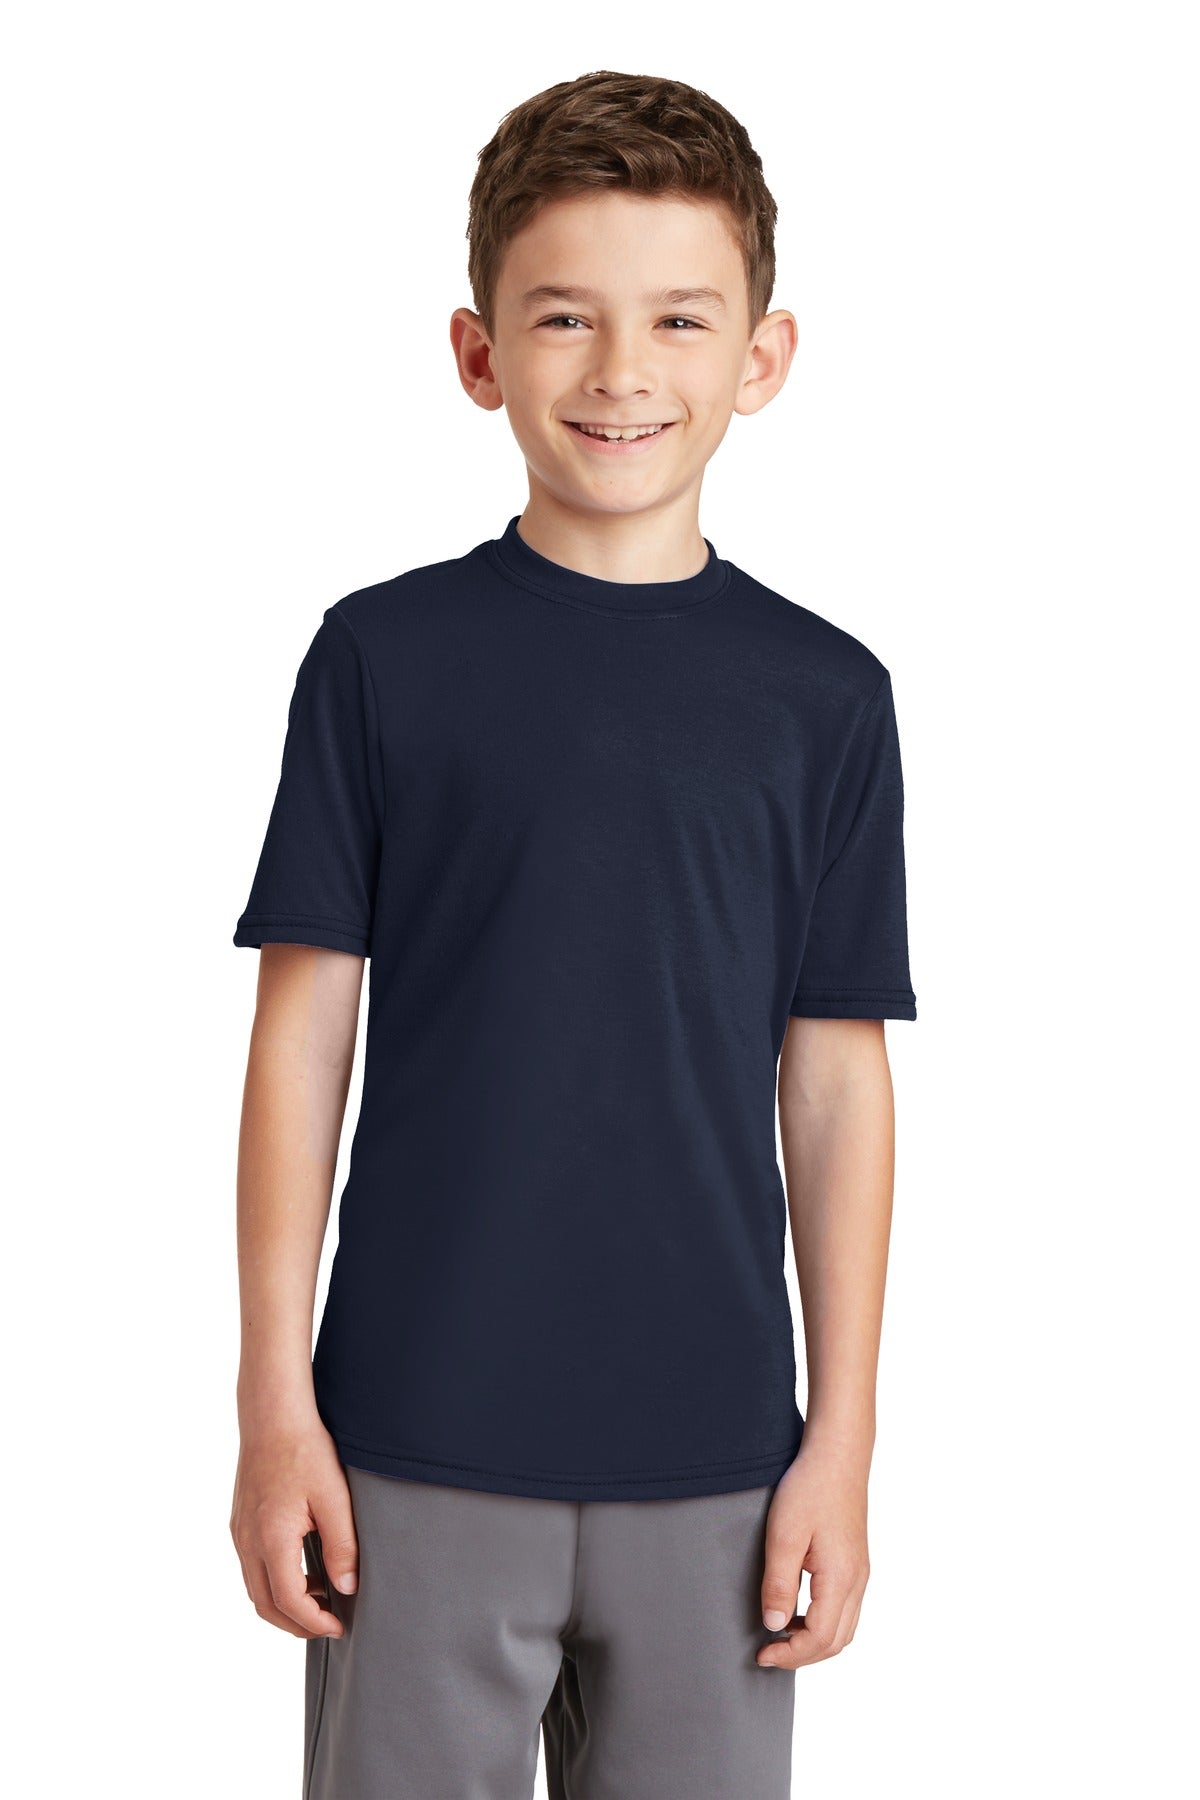 Port & Company® Youth Performance Blend Tee. PC381Y - DFW Impression